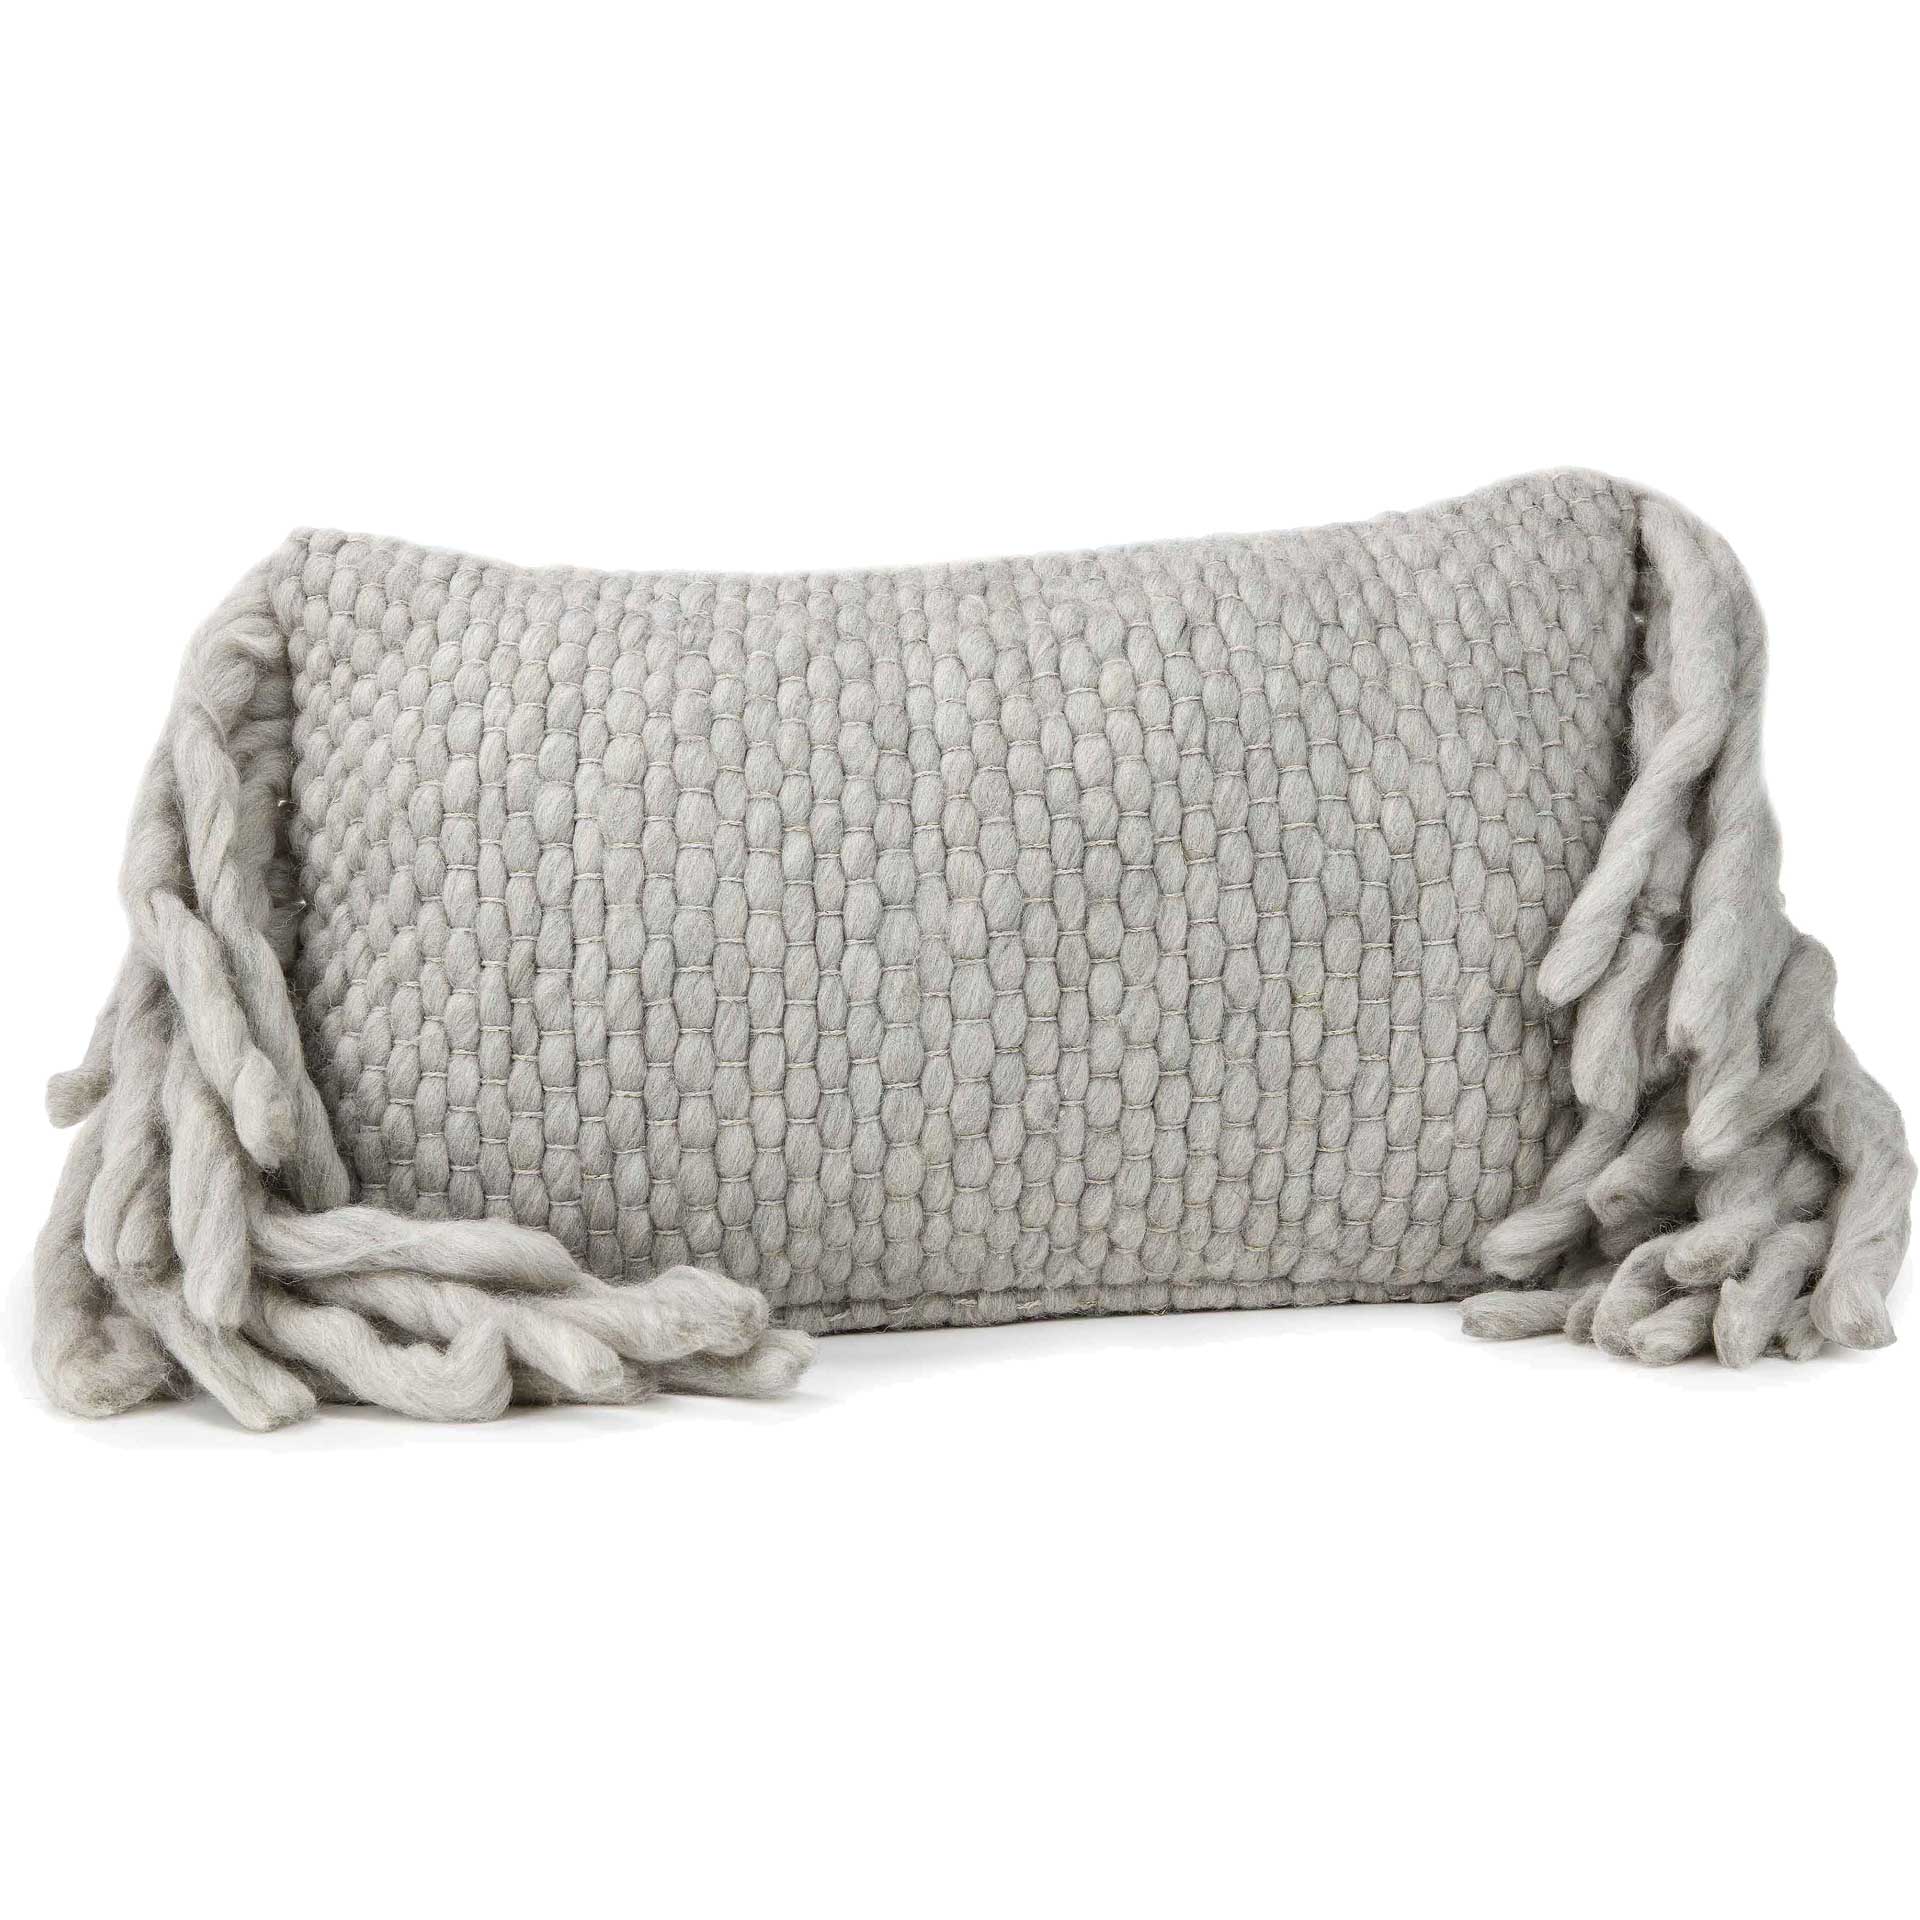 Affinity Wool Pillow Gray